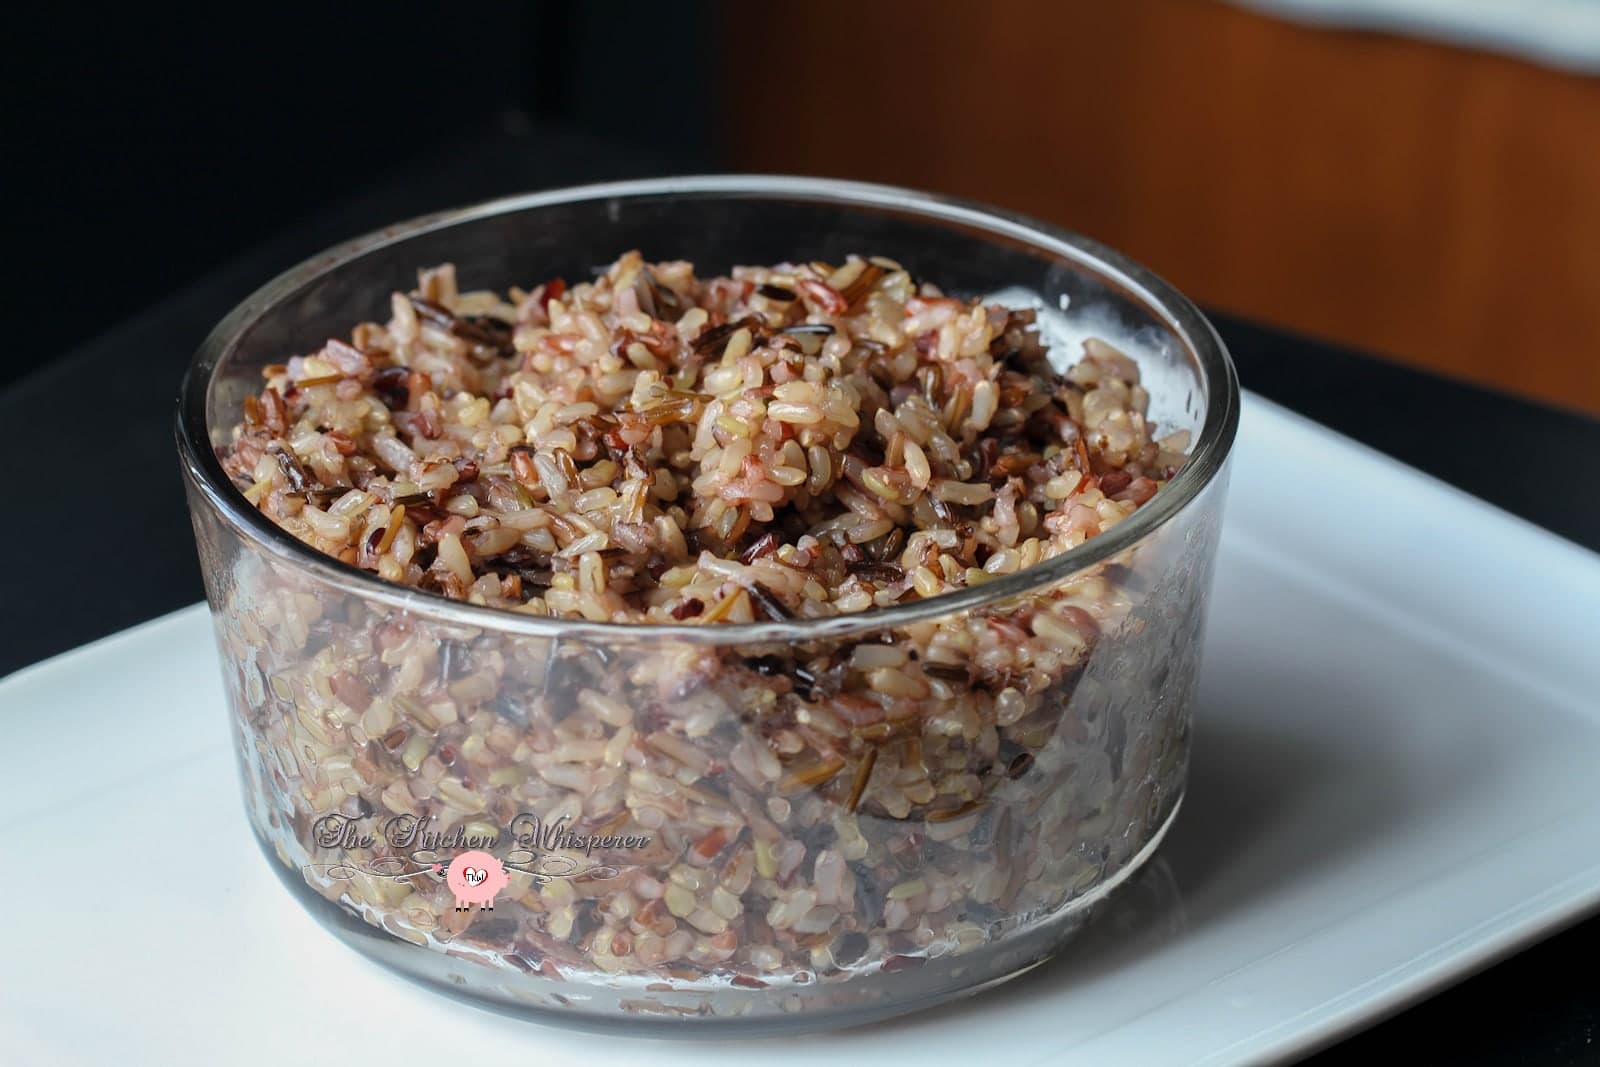 I Cooked Instant Zatarain's Rice in the Rice Steamer